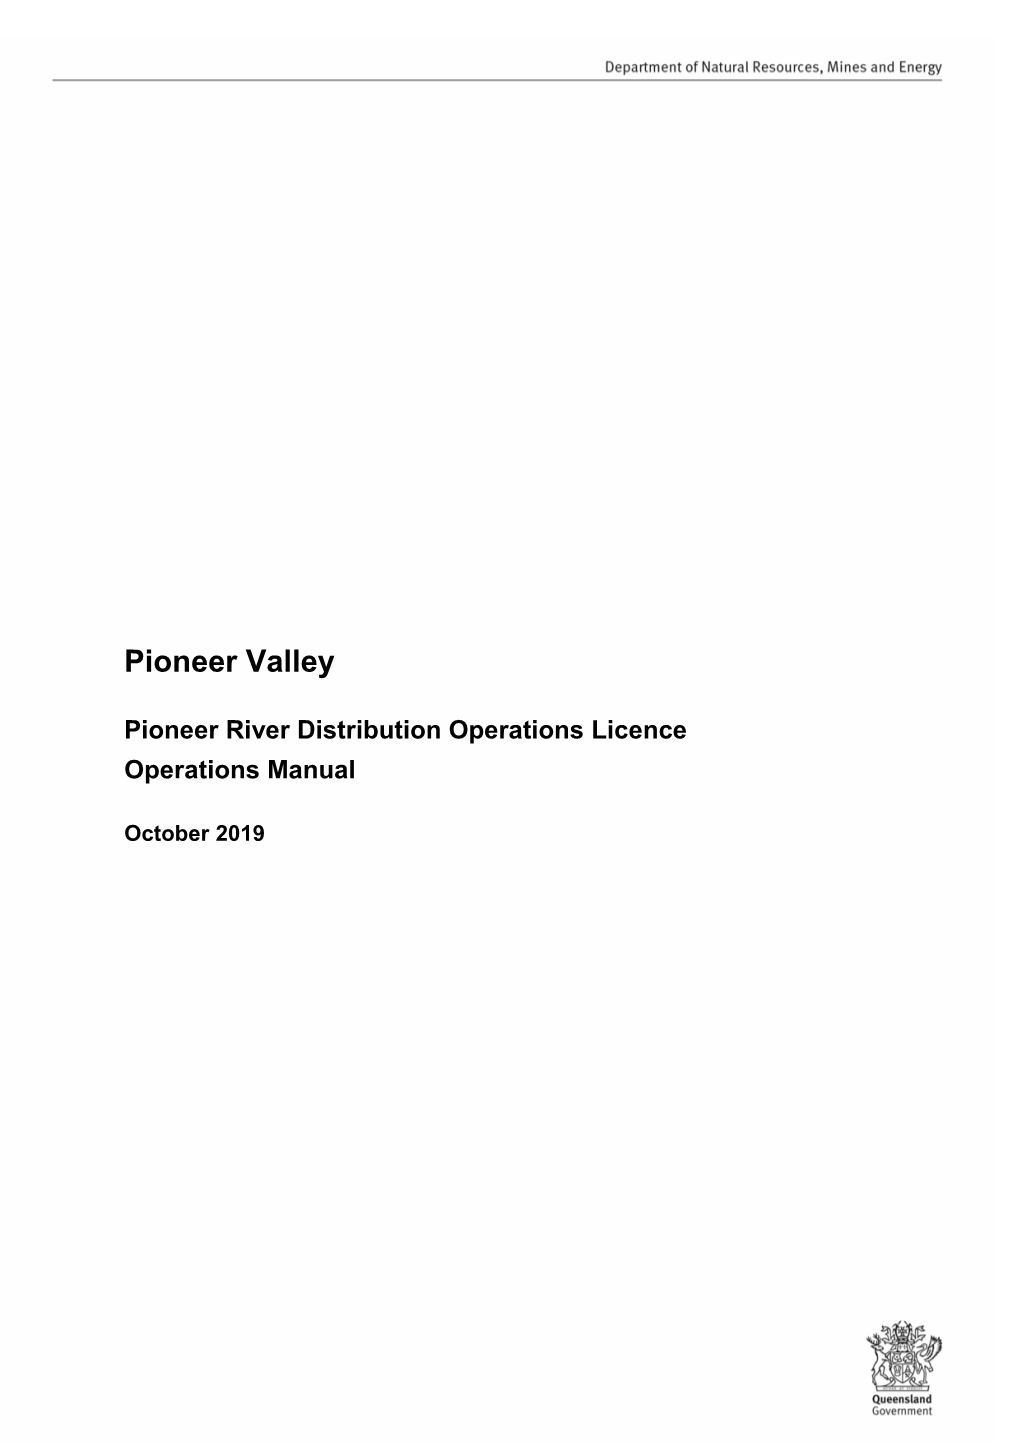 Pioneer River Distribution Operations Licence Operations Manual